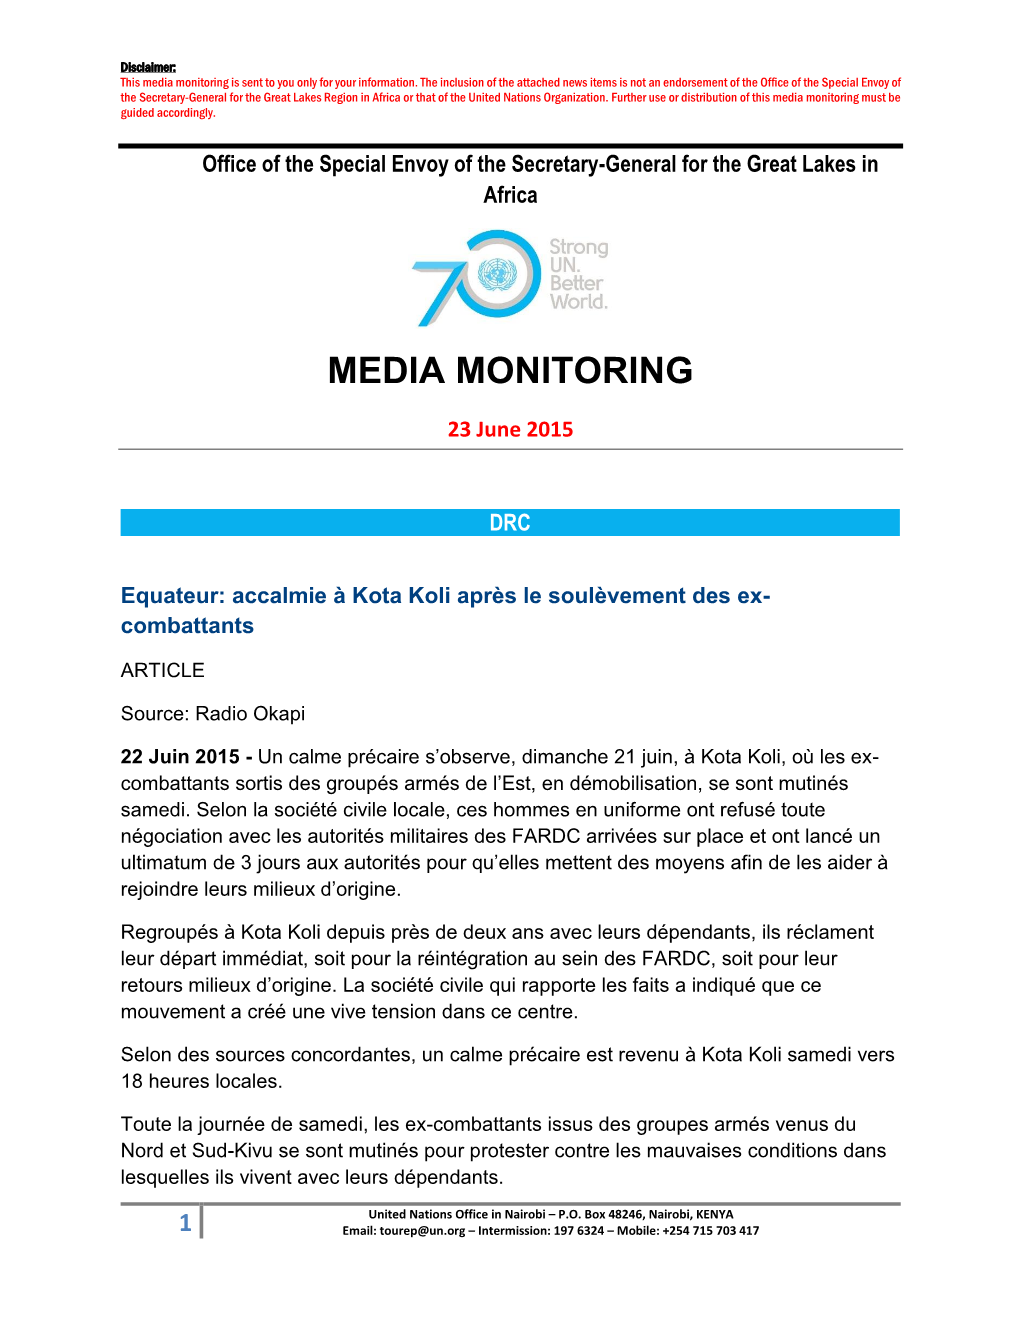 Media Monitoring Is Sent to You Only for Your Information